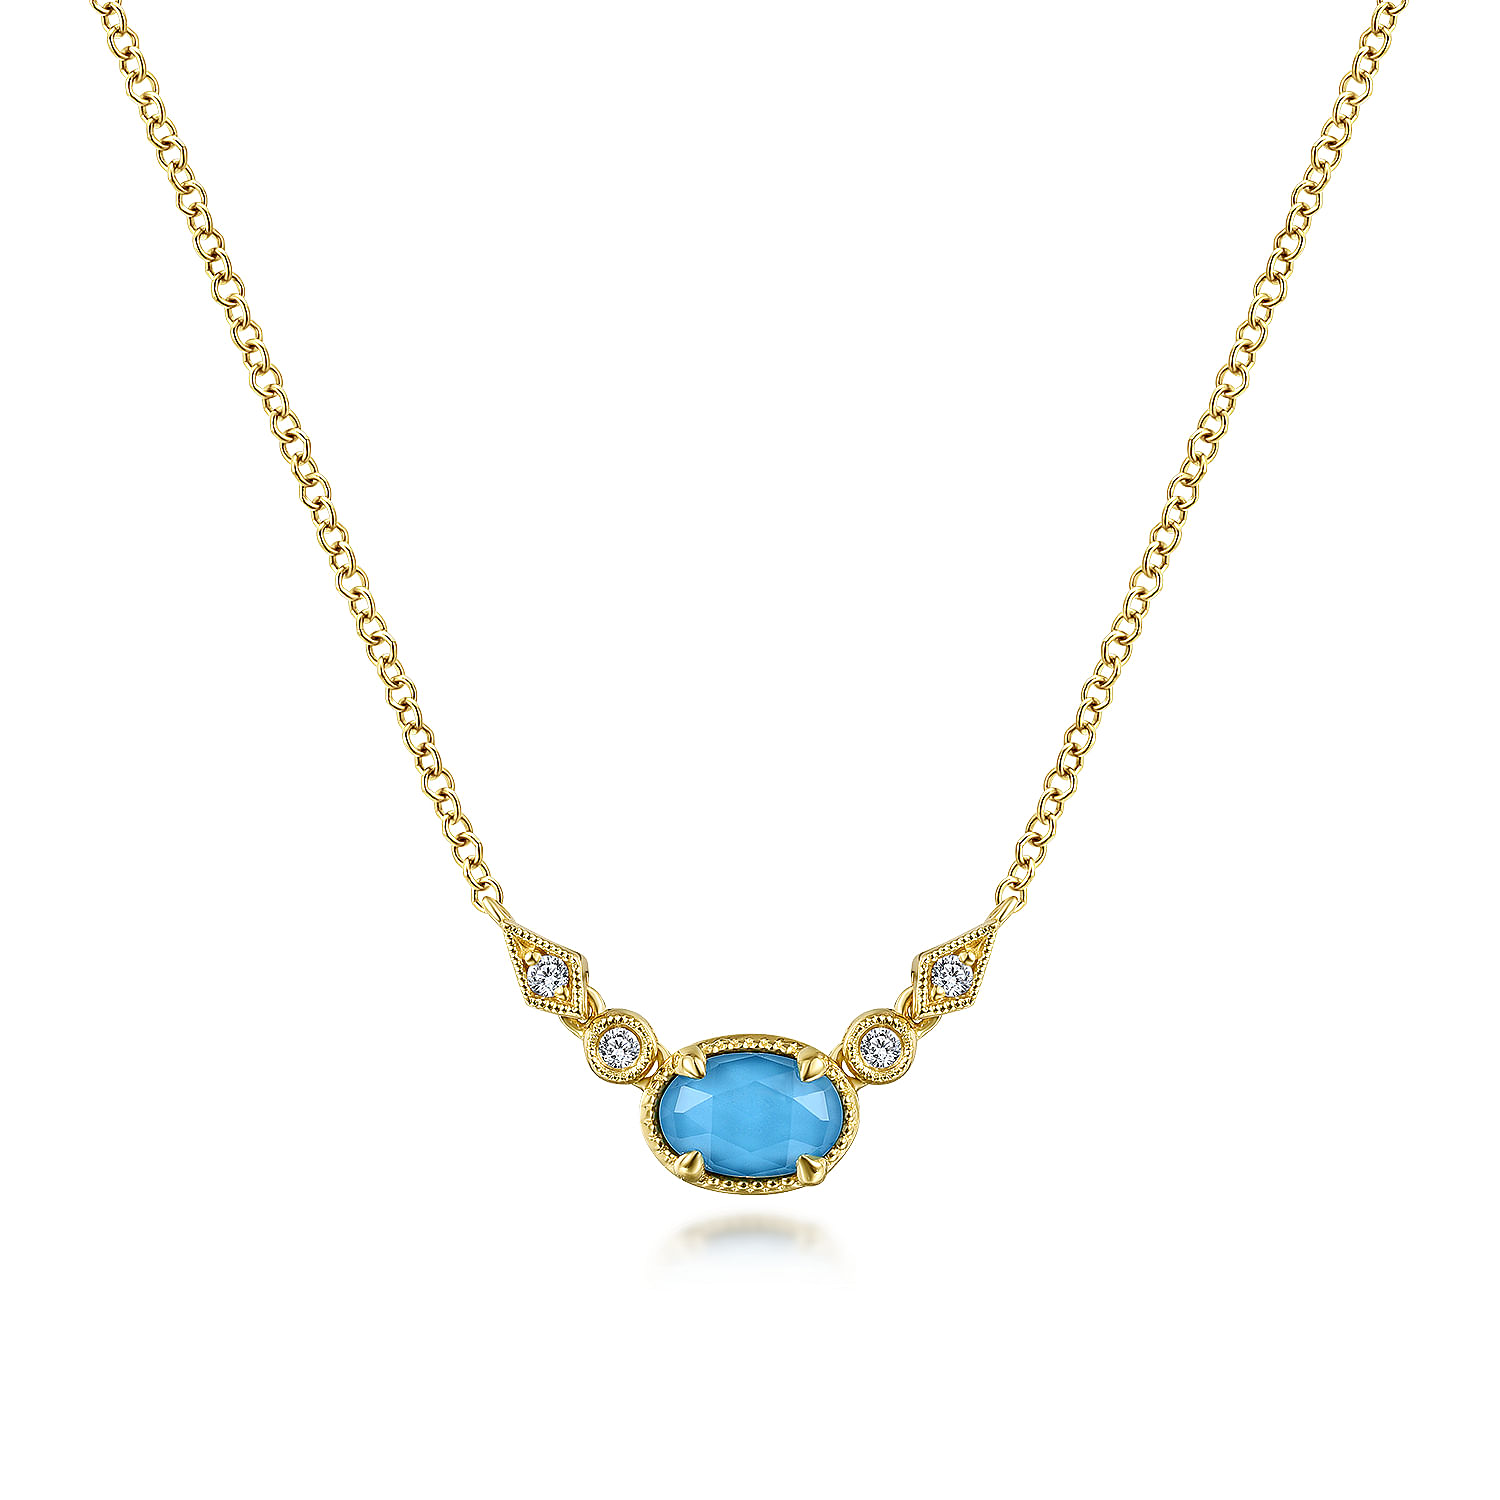 14K Yellow Gold Oval Rock Crystal/Turquoise Necklace with Diamond Accents